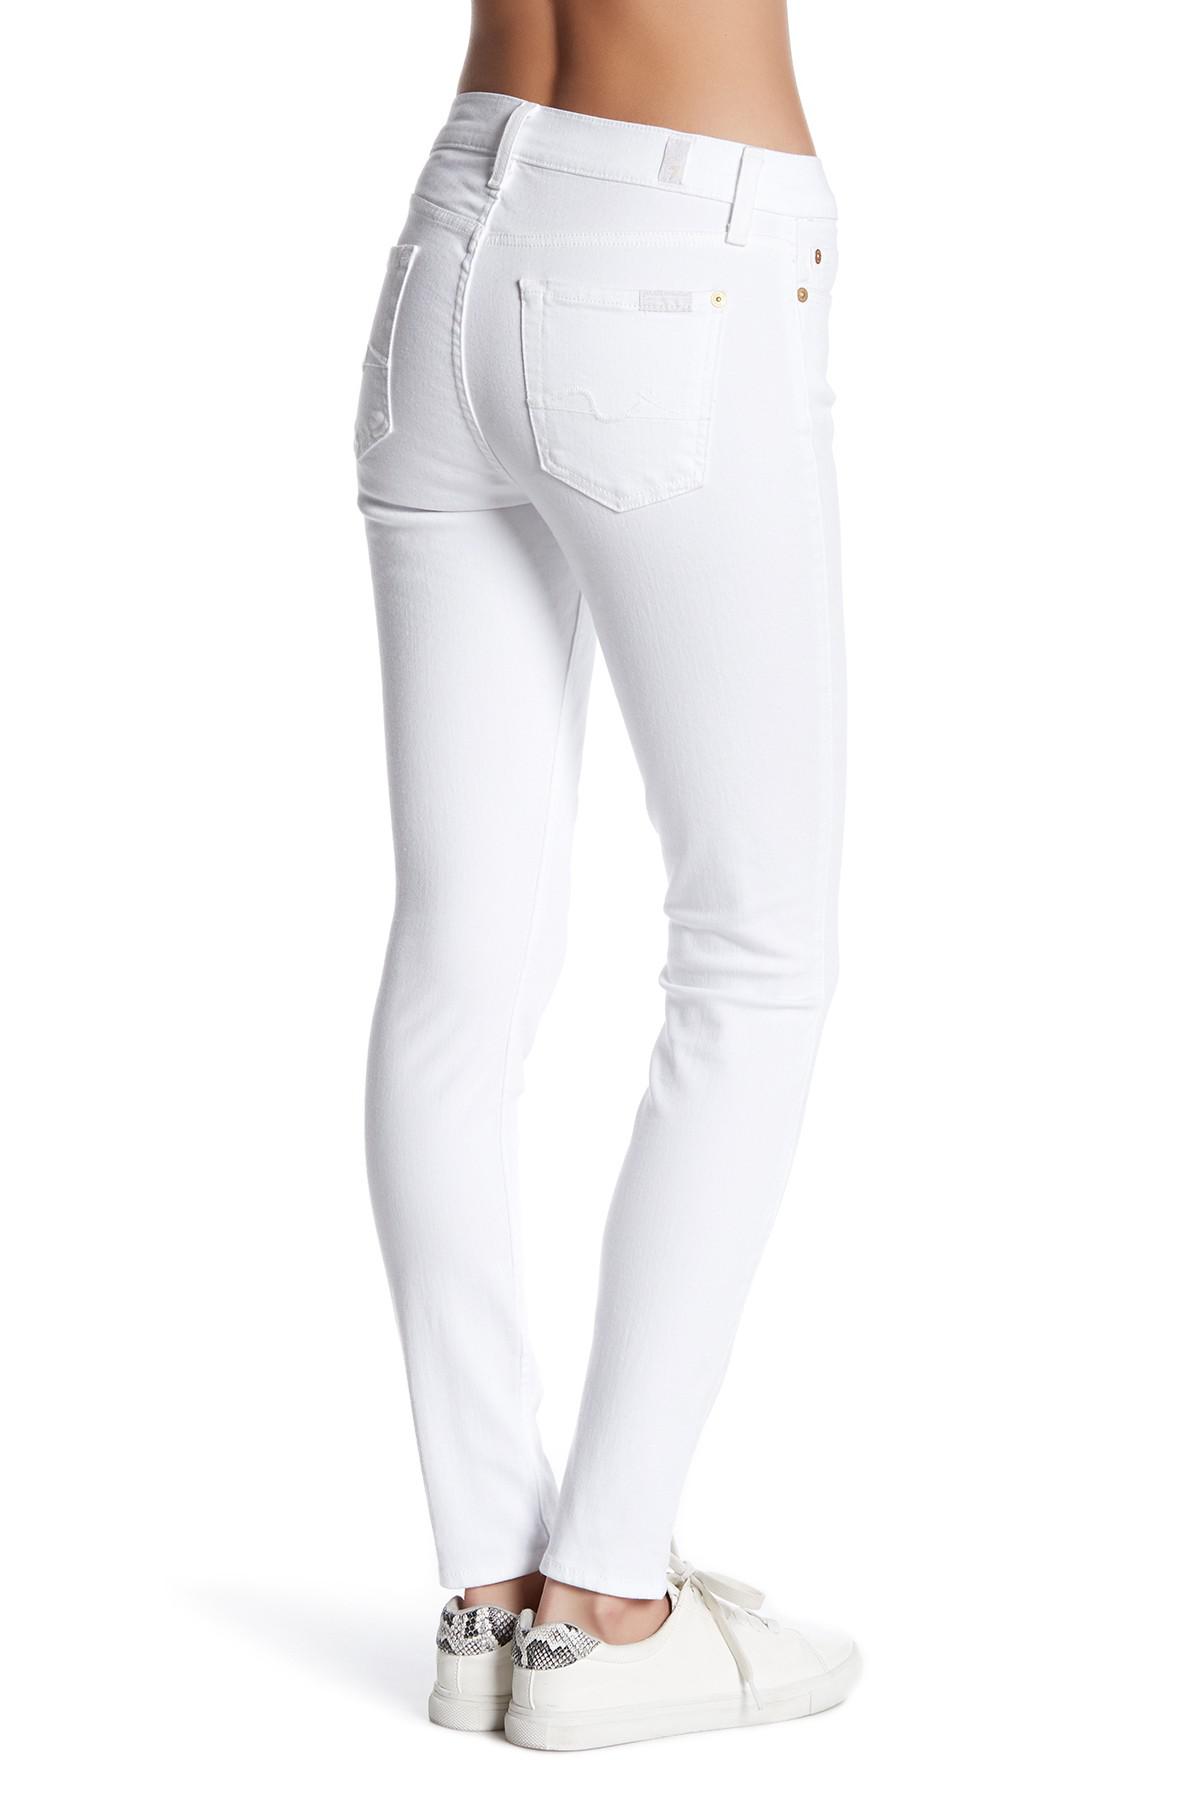 7 For All Mankind Gwenevere Skinny Ankle Jean in White | Lyst